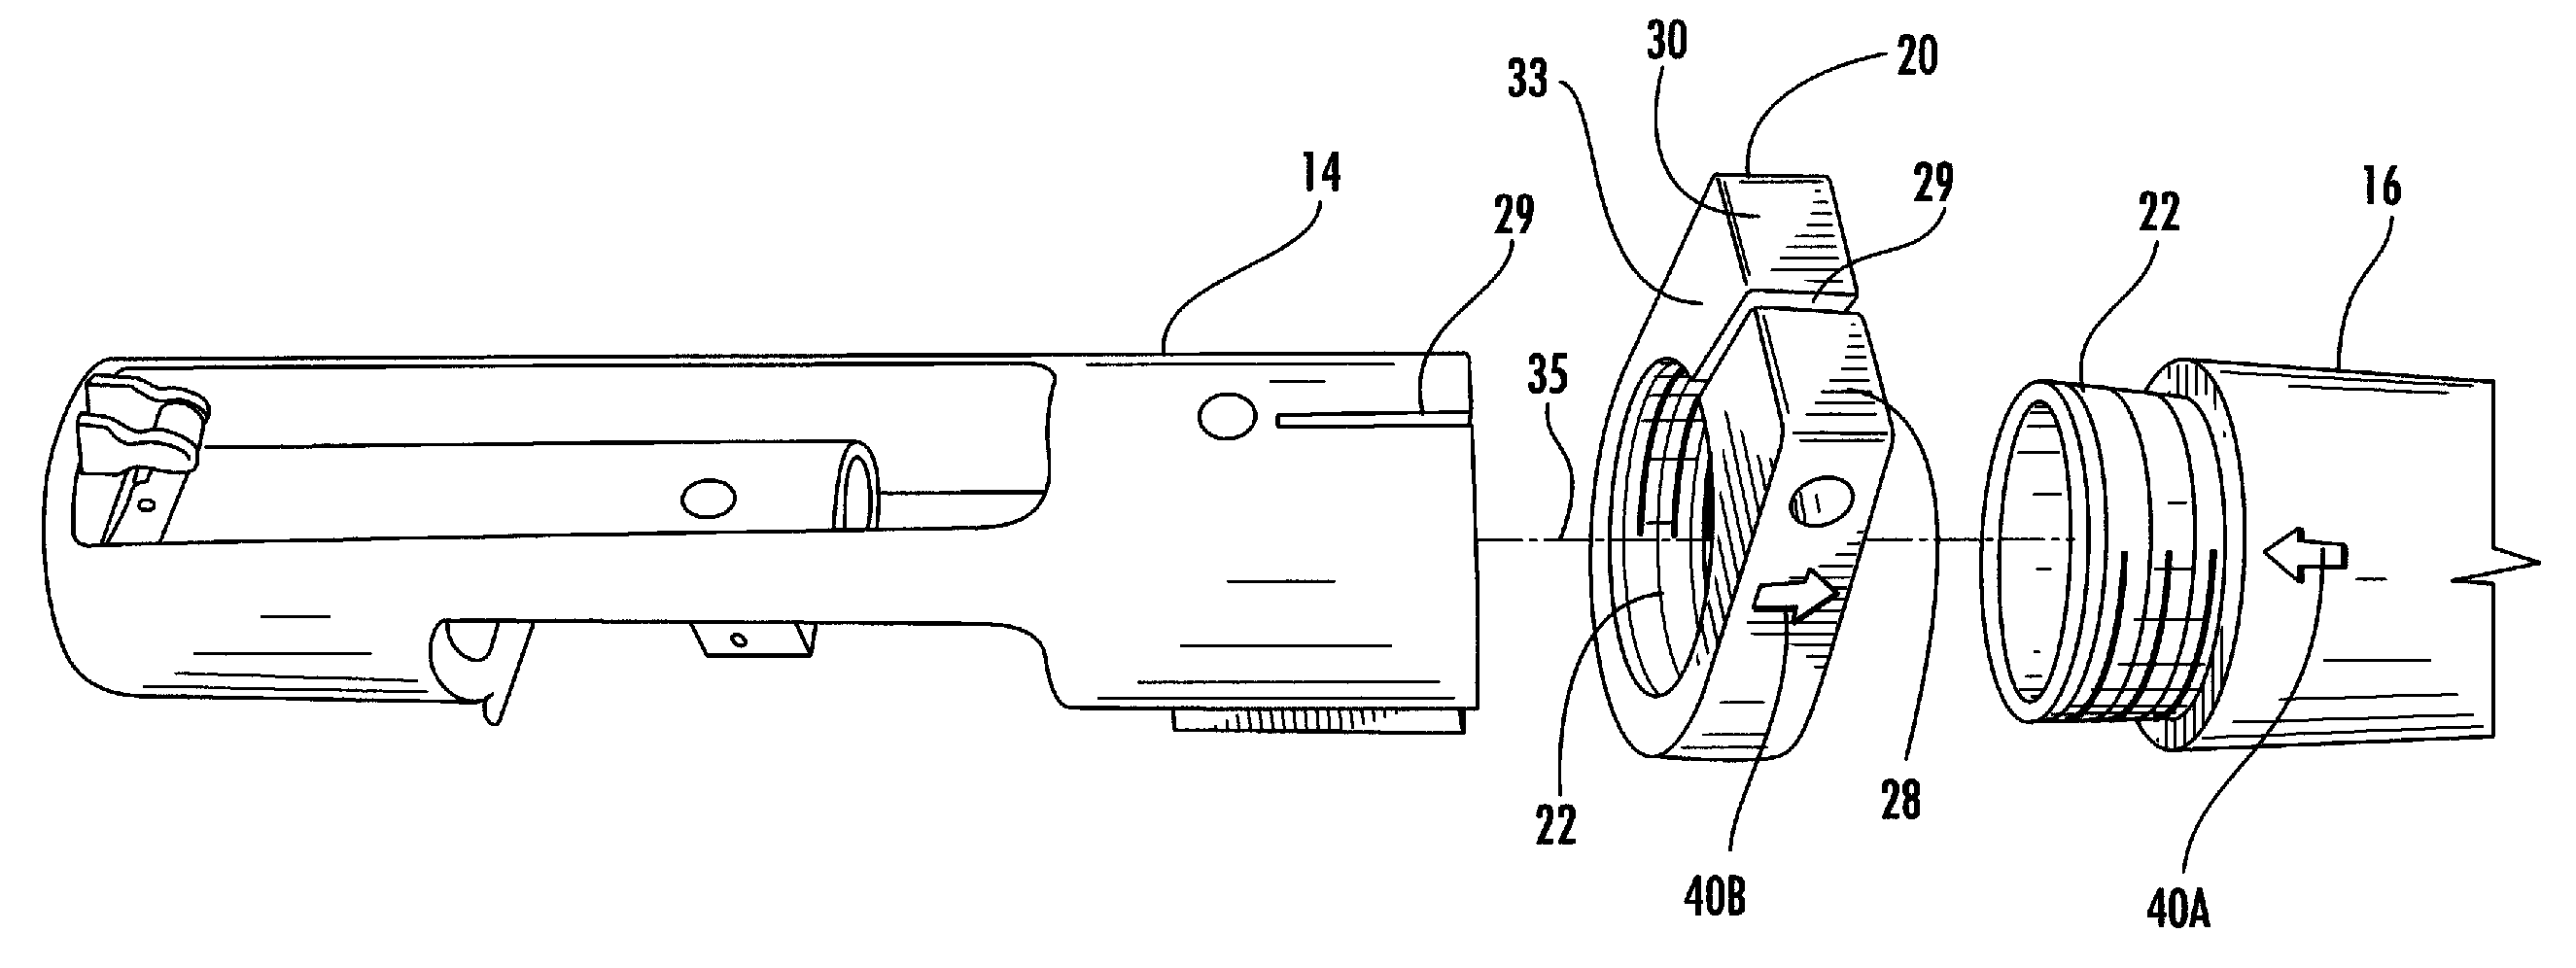 Interchangeable barrel system for rifles